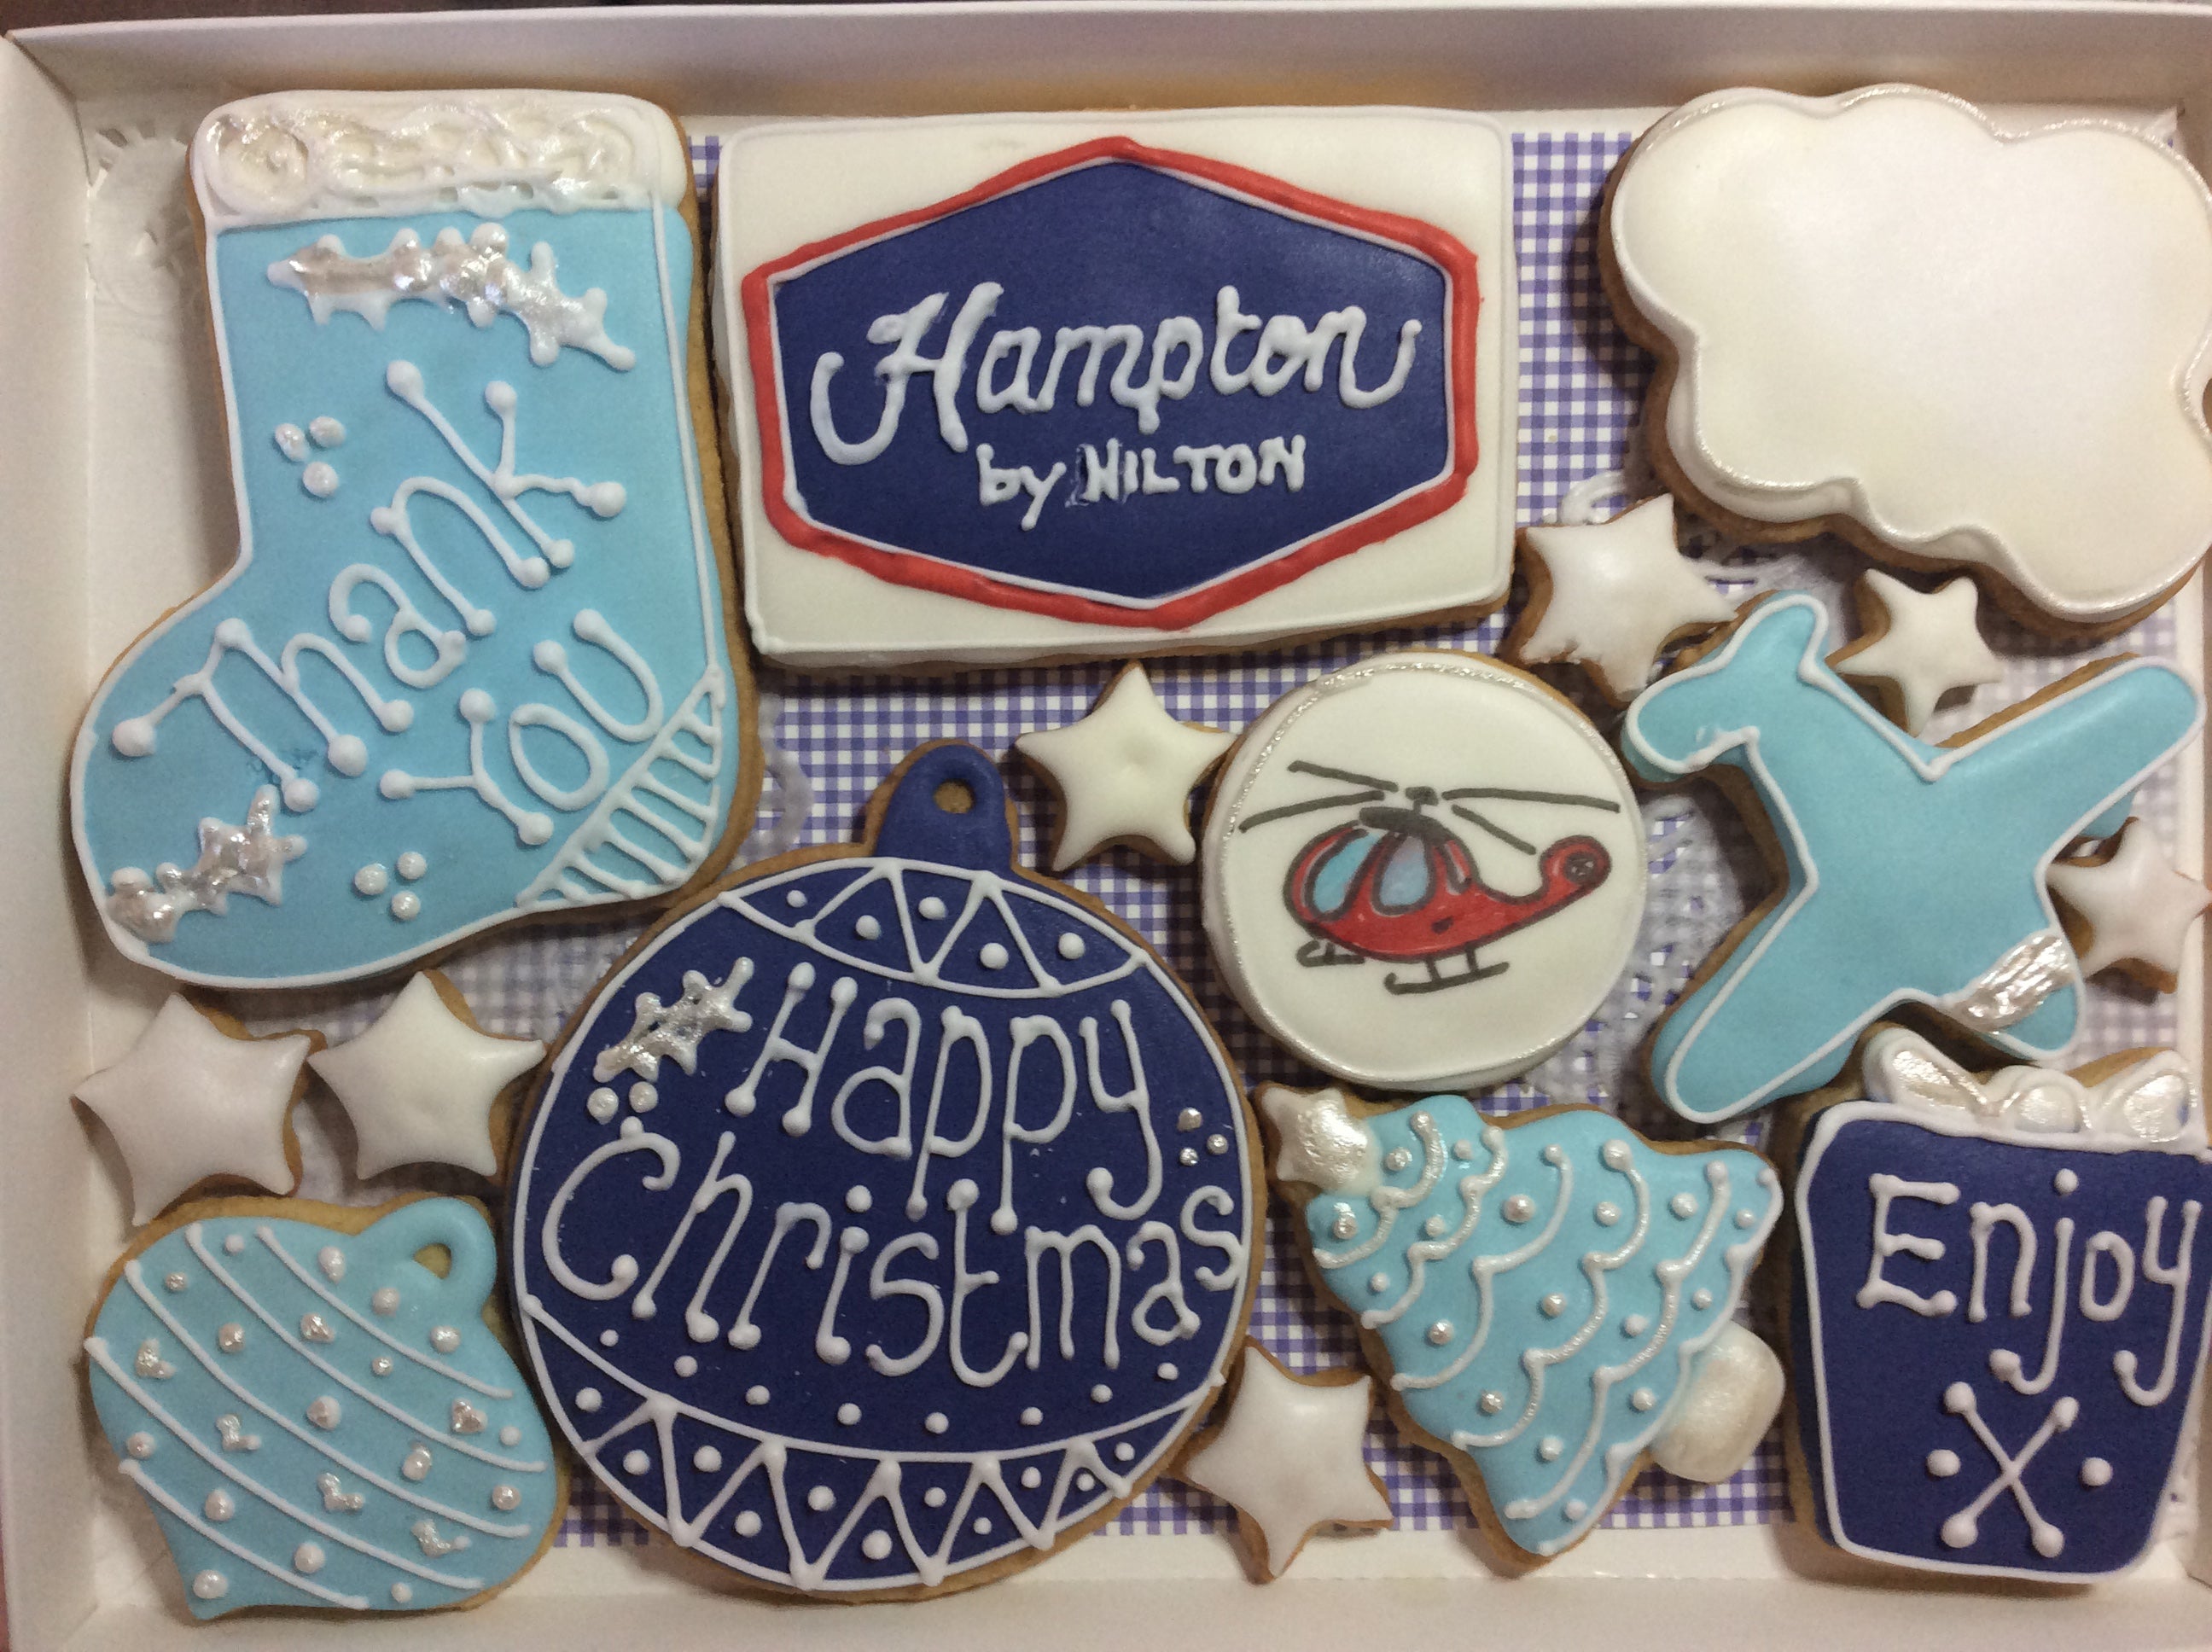 This delicious box of Christmas cookies are personalised with your company logo and words appropriate to your needs. The personalised biscuits can be in multiple colours or single brand colours for your business. Delicious cookie / biscuits treat for customers, suppliers and staff